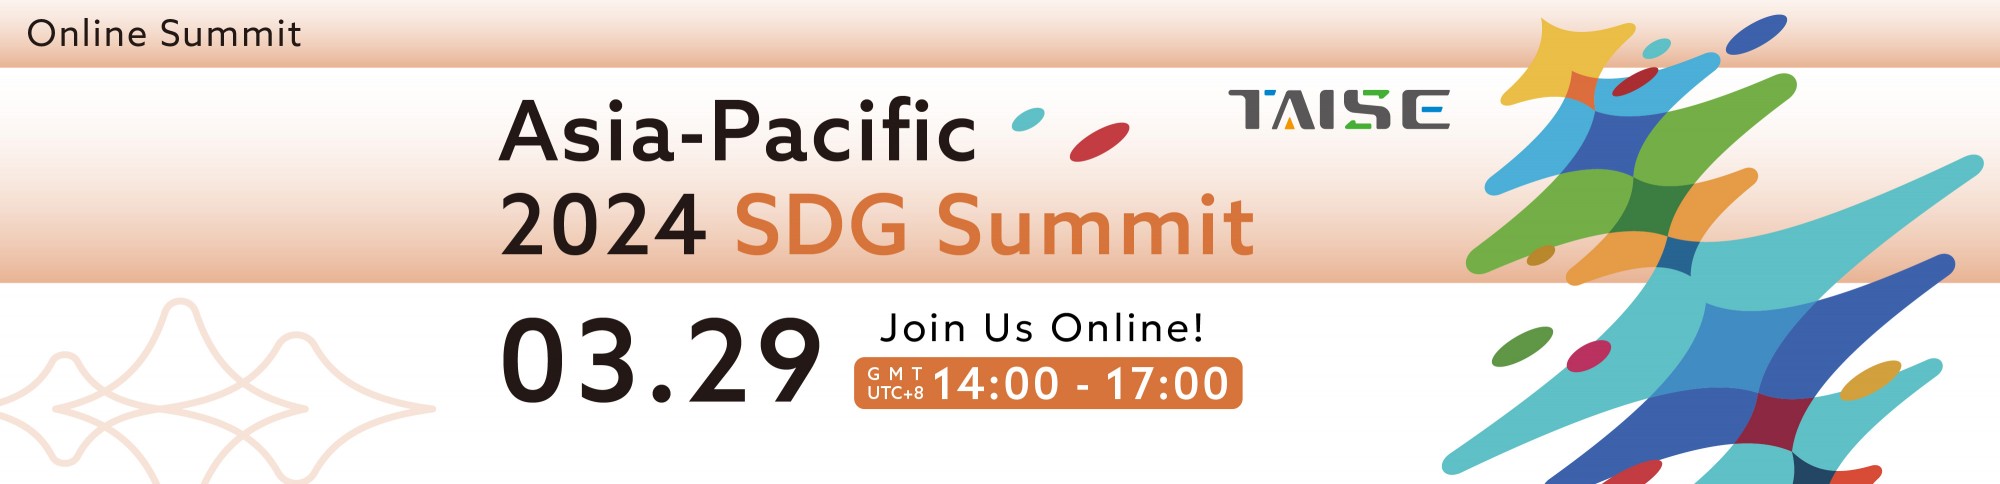 Join Asia-Pacific 2024 SDG Summit Now!